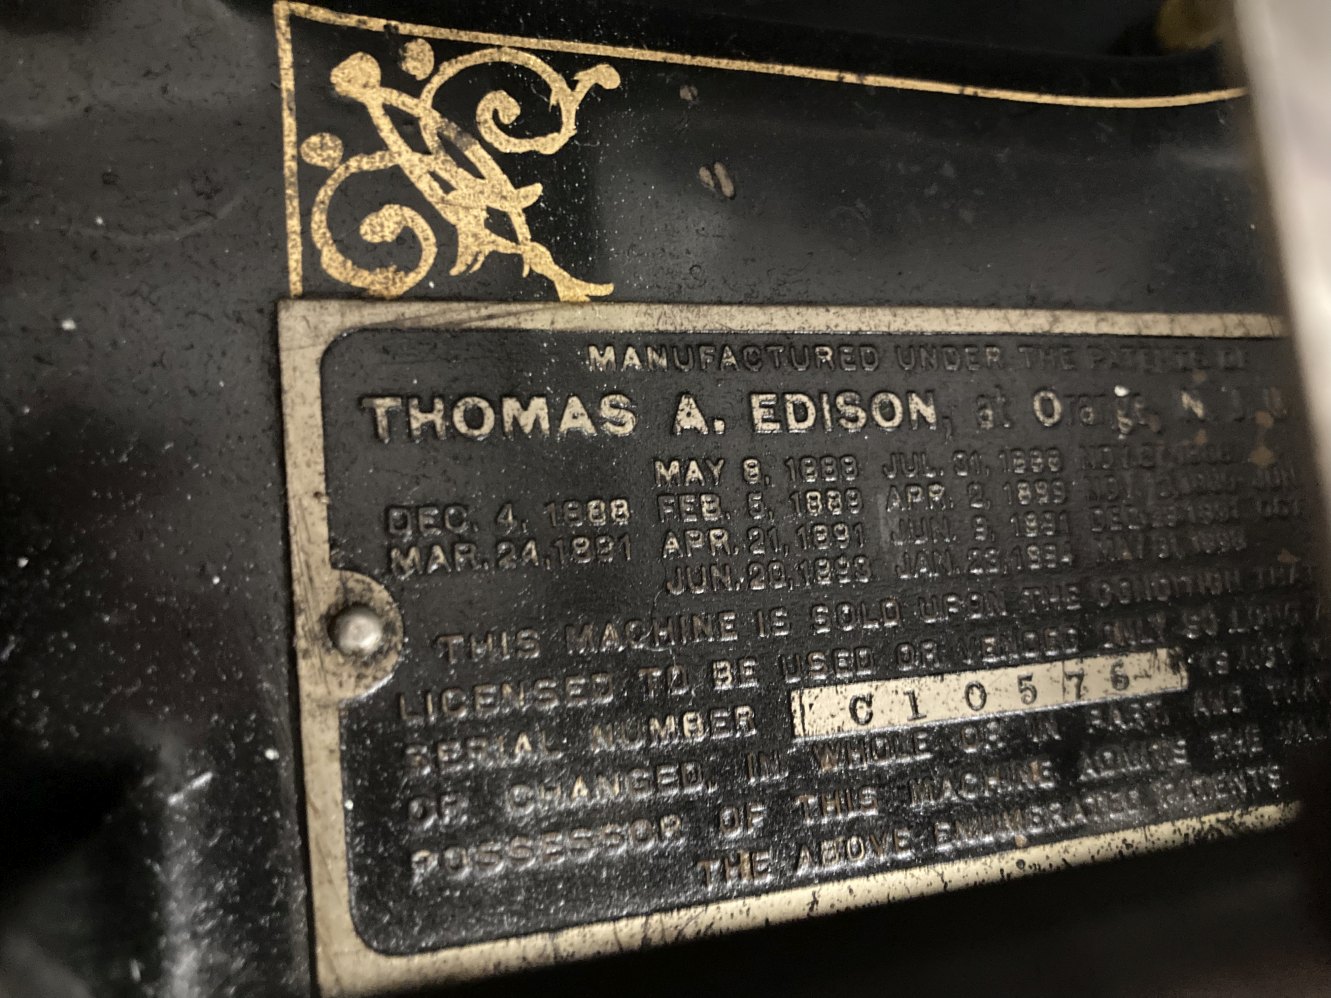 Mechanical Music Property of Local Collector. Edison Duplex Cylinder Phonograph serial no. C10576 - Image 4 of 9